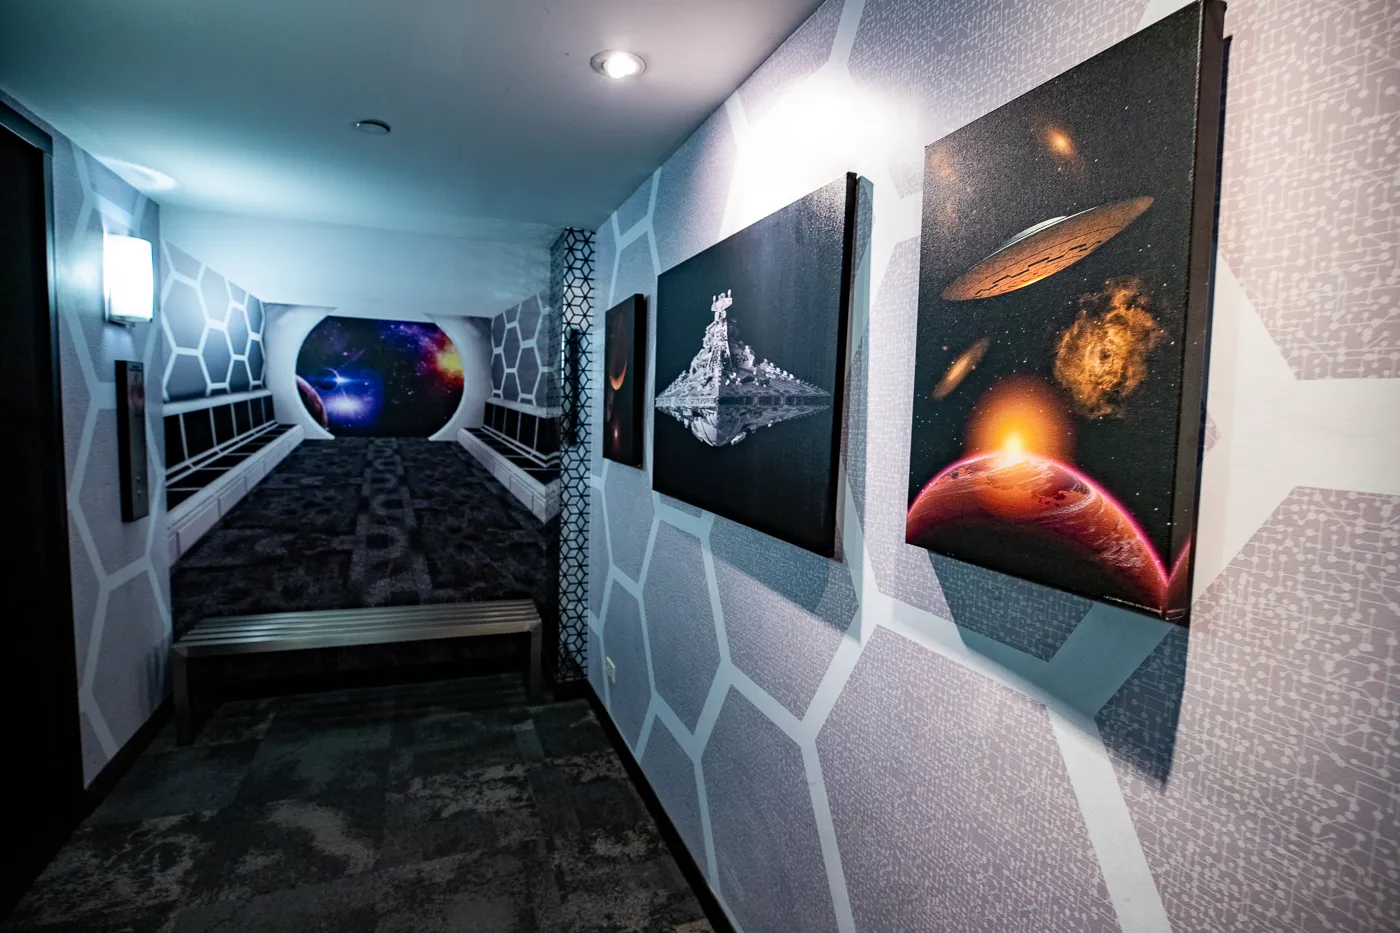 Sci Fi floor of The Curtis Hotel - a Themed Hotel in Denver, Colorado